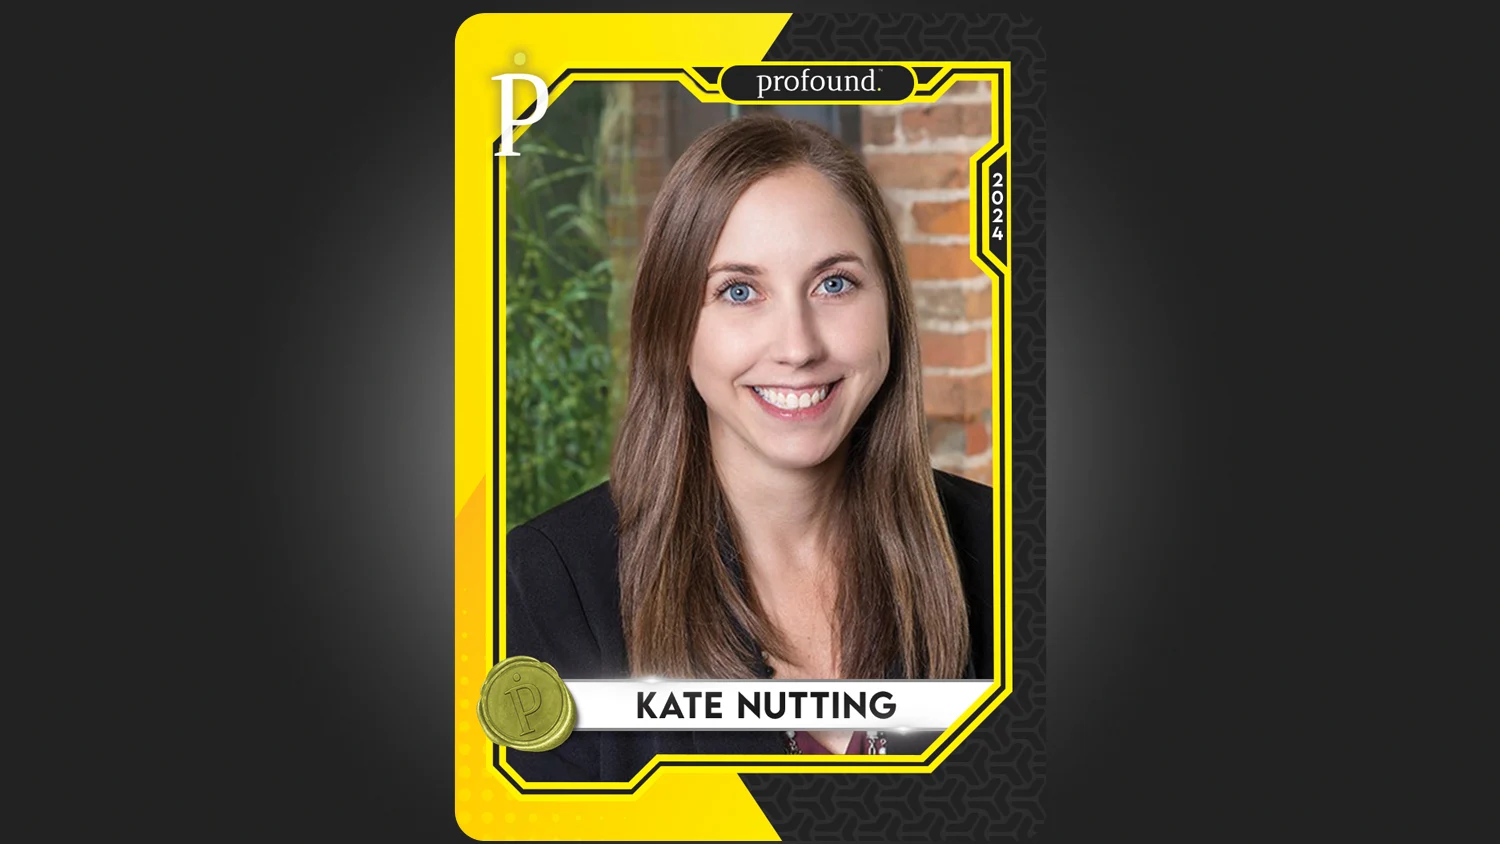 Kate Nutting